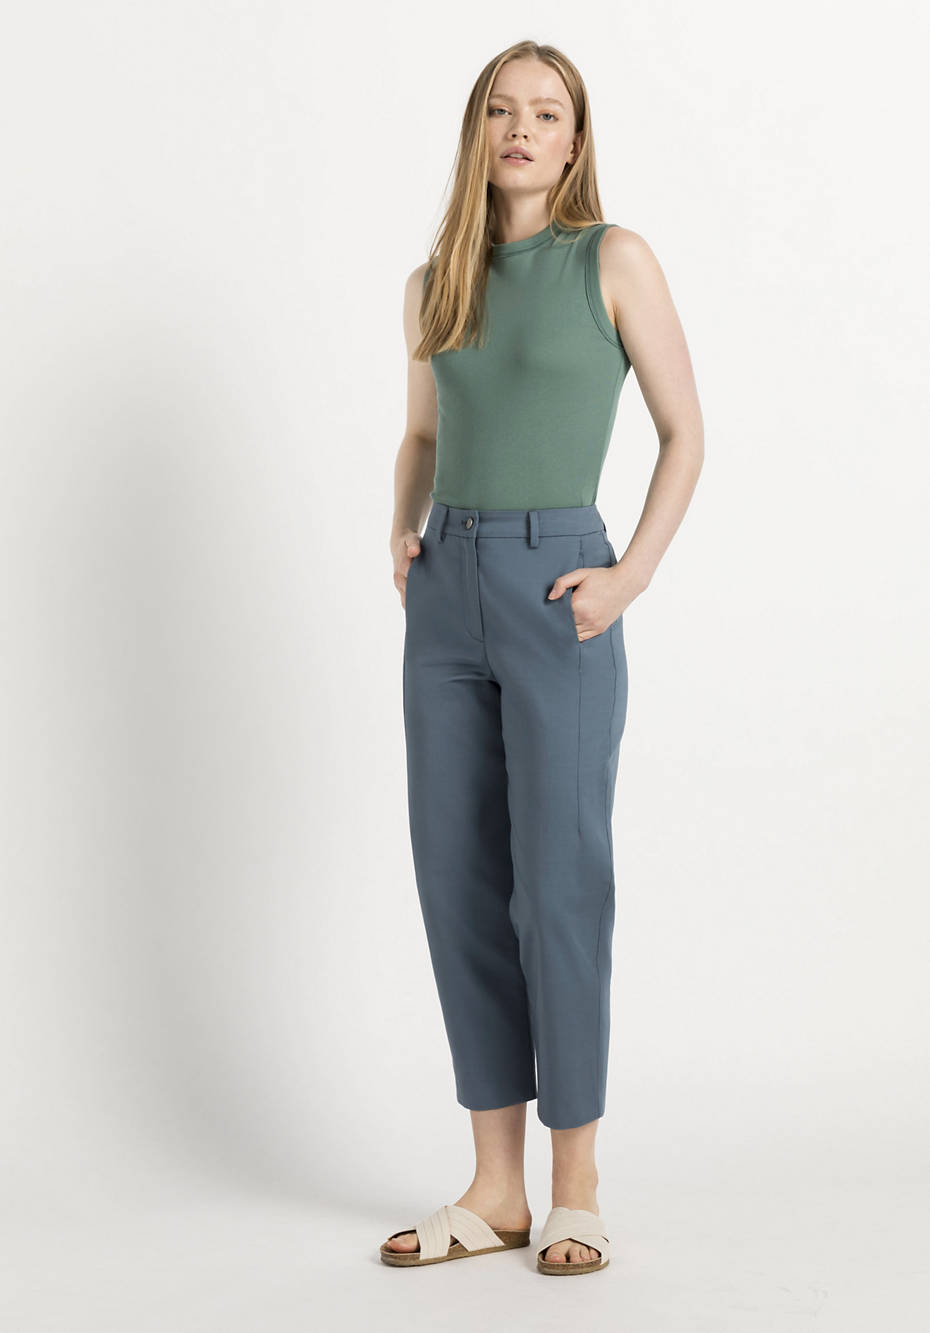 Pure organic cotton trousers